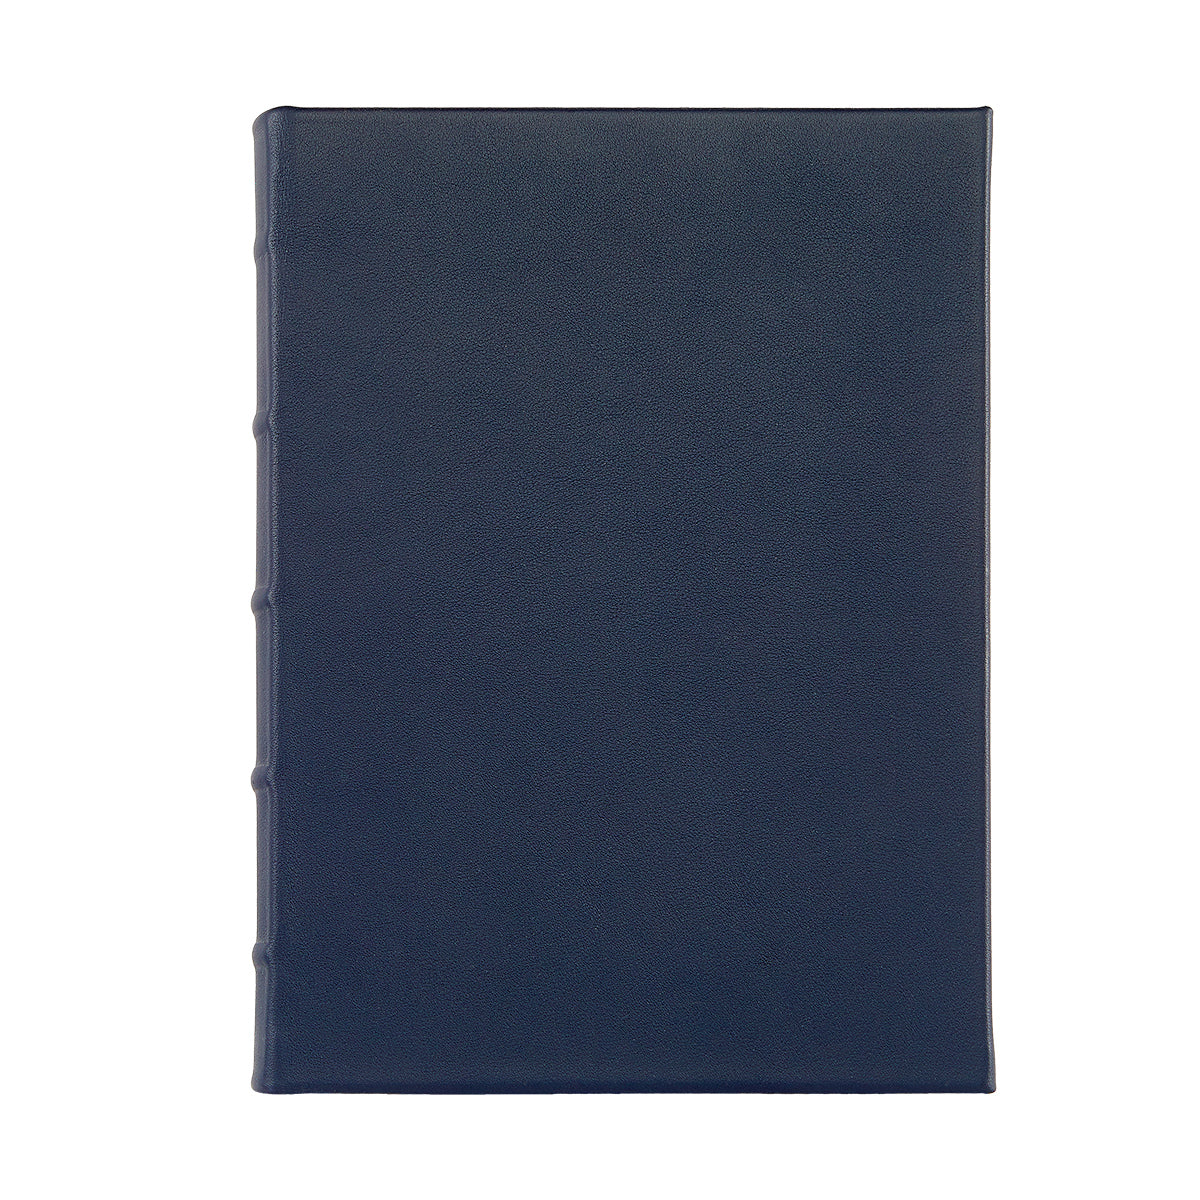 Graphic Image 9" Hardcover Journal Blue Traditional Leather